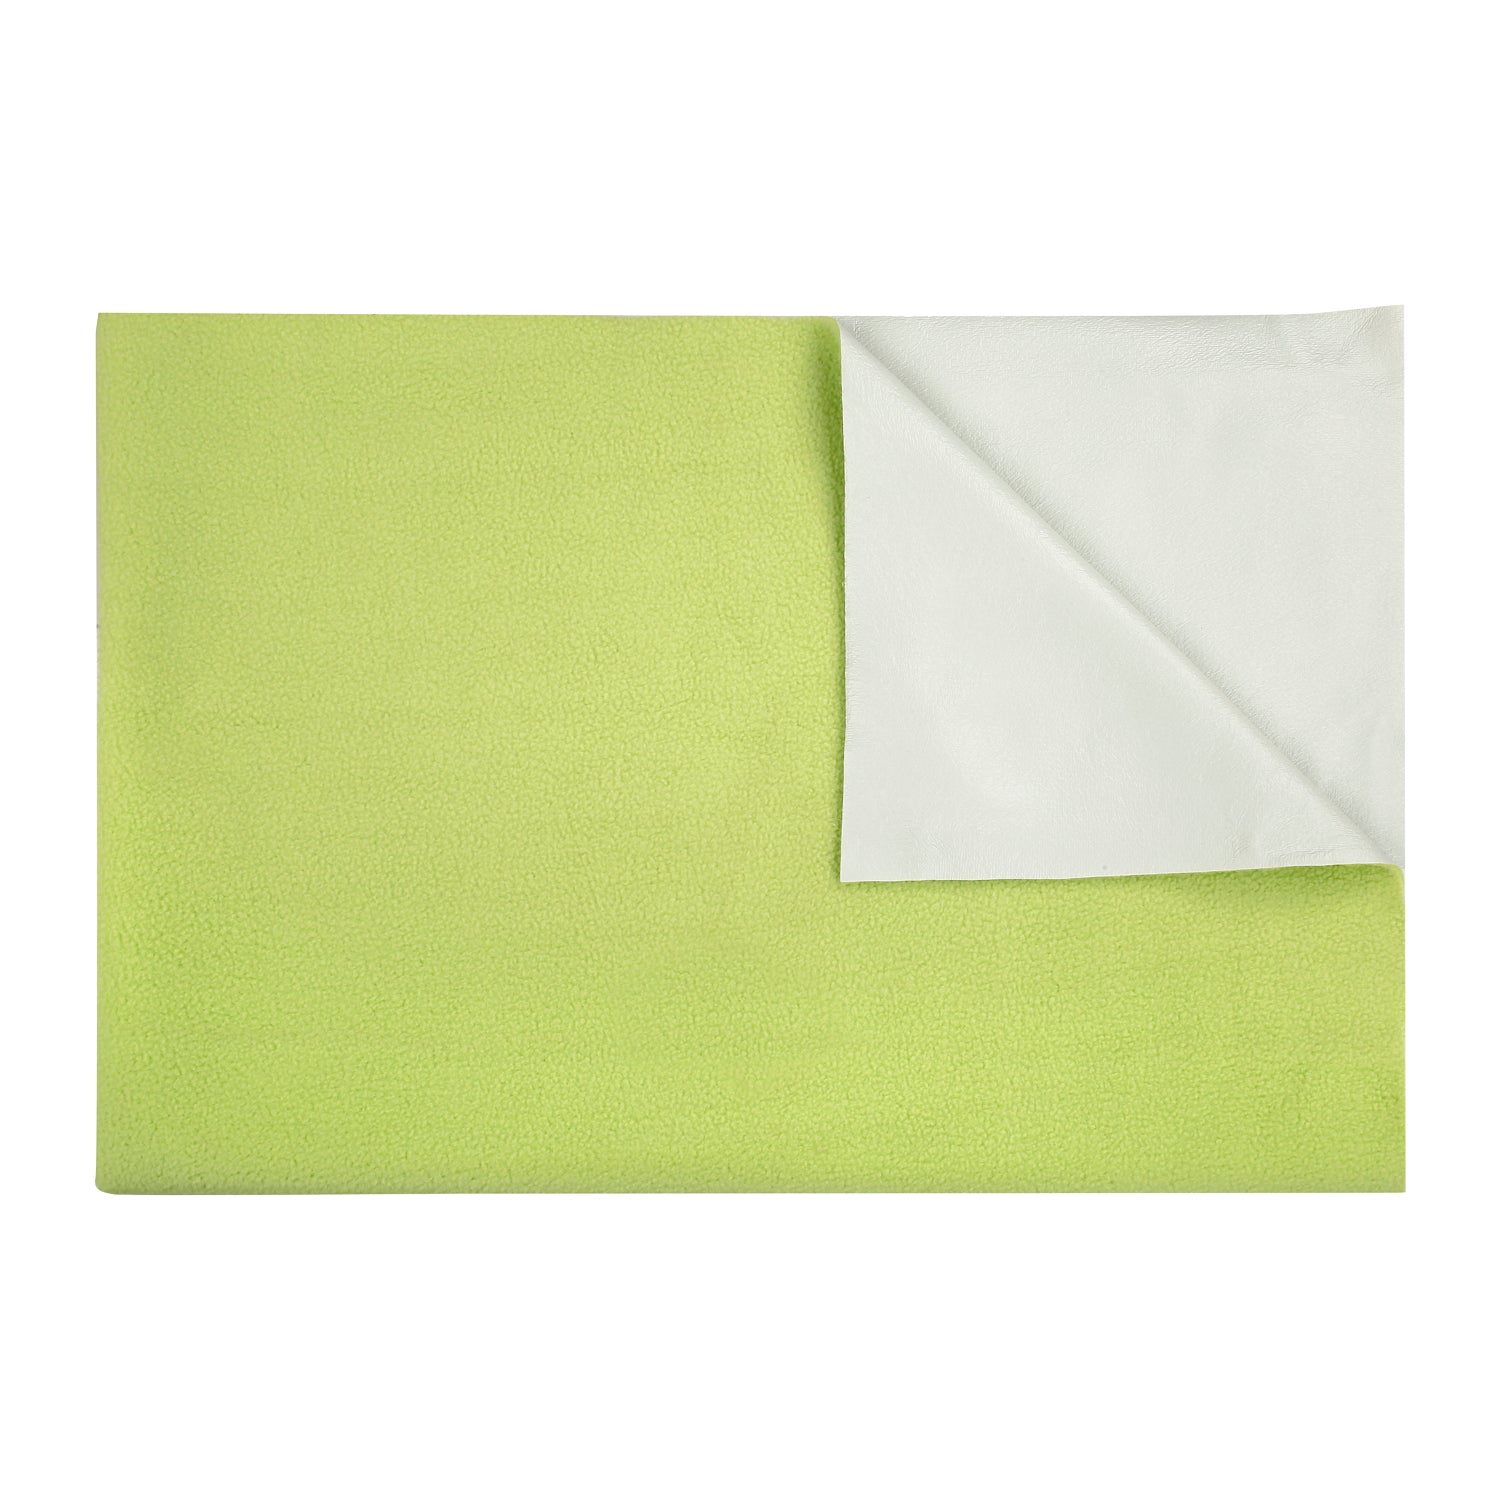 Plain Light Green Water-Resistant Bed Protector - 3 Sizes - Baby Moo